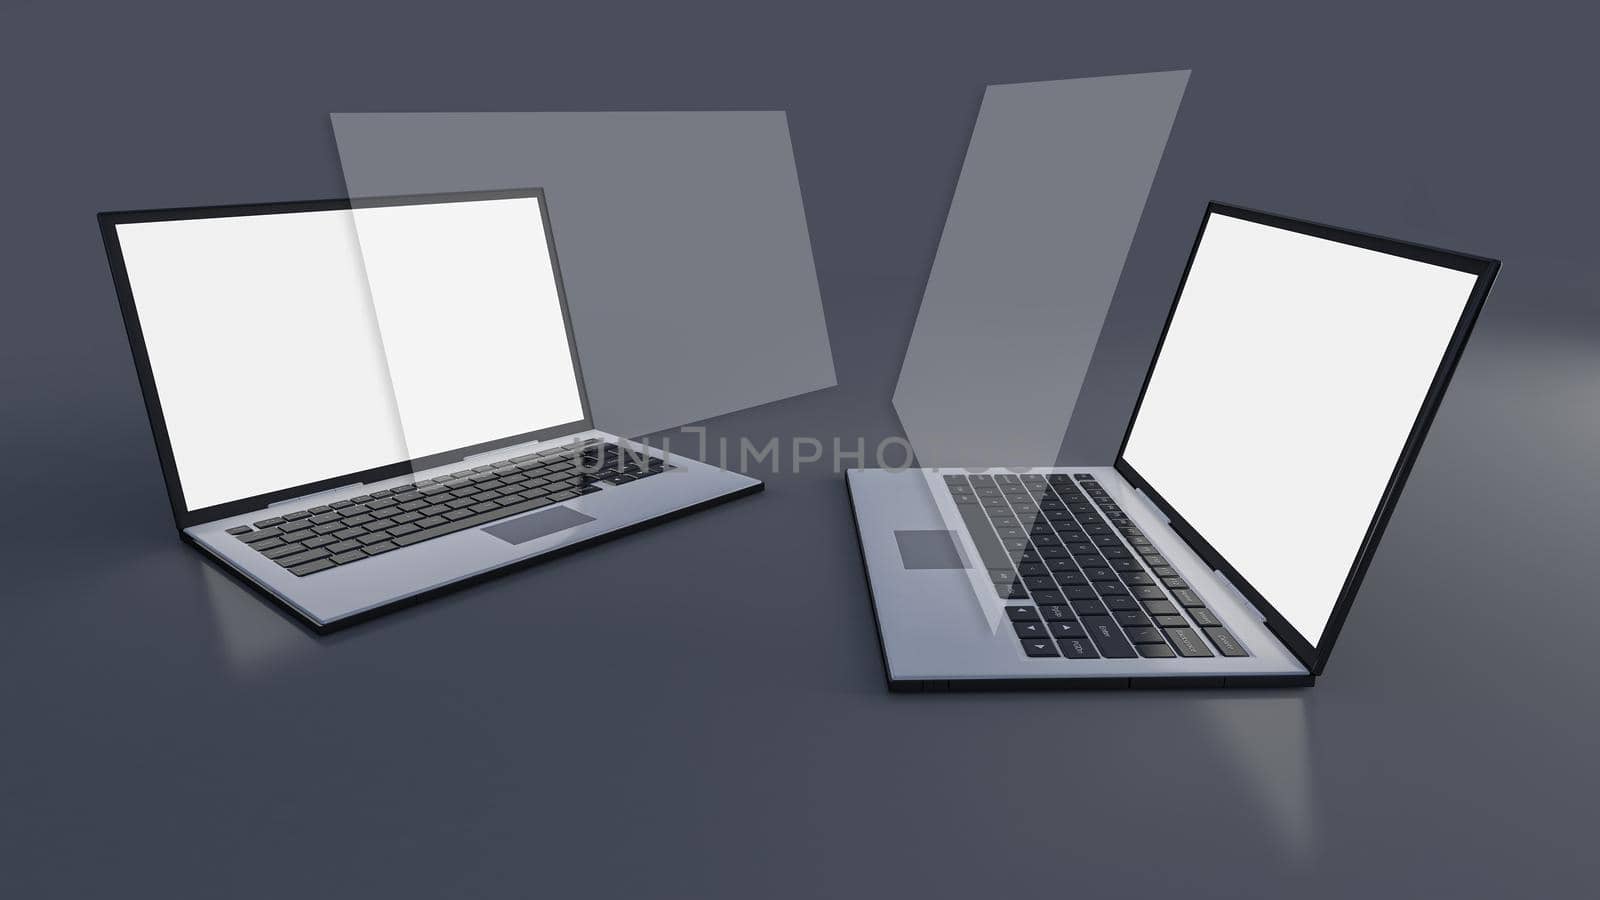 3d rendering image of laptop on dark gray background. Laptop screen mockup for you customize